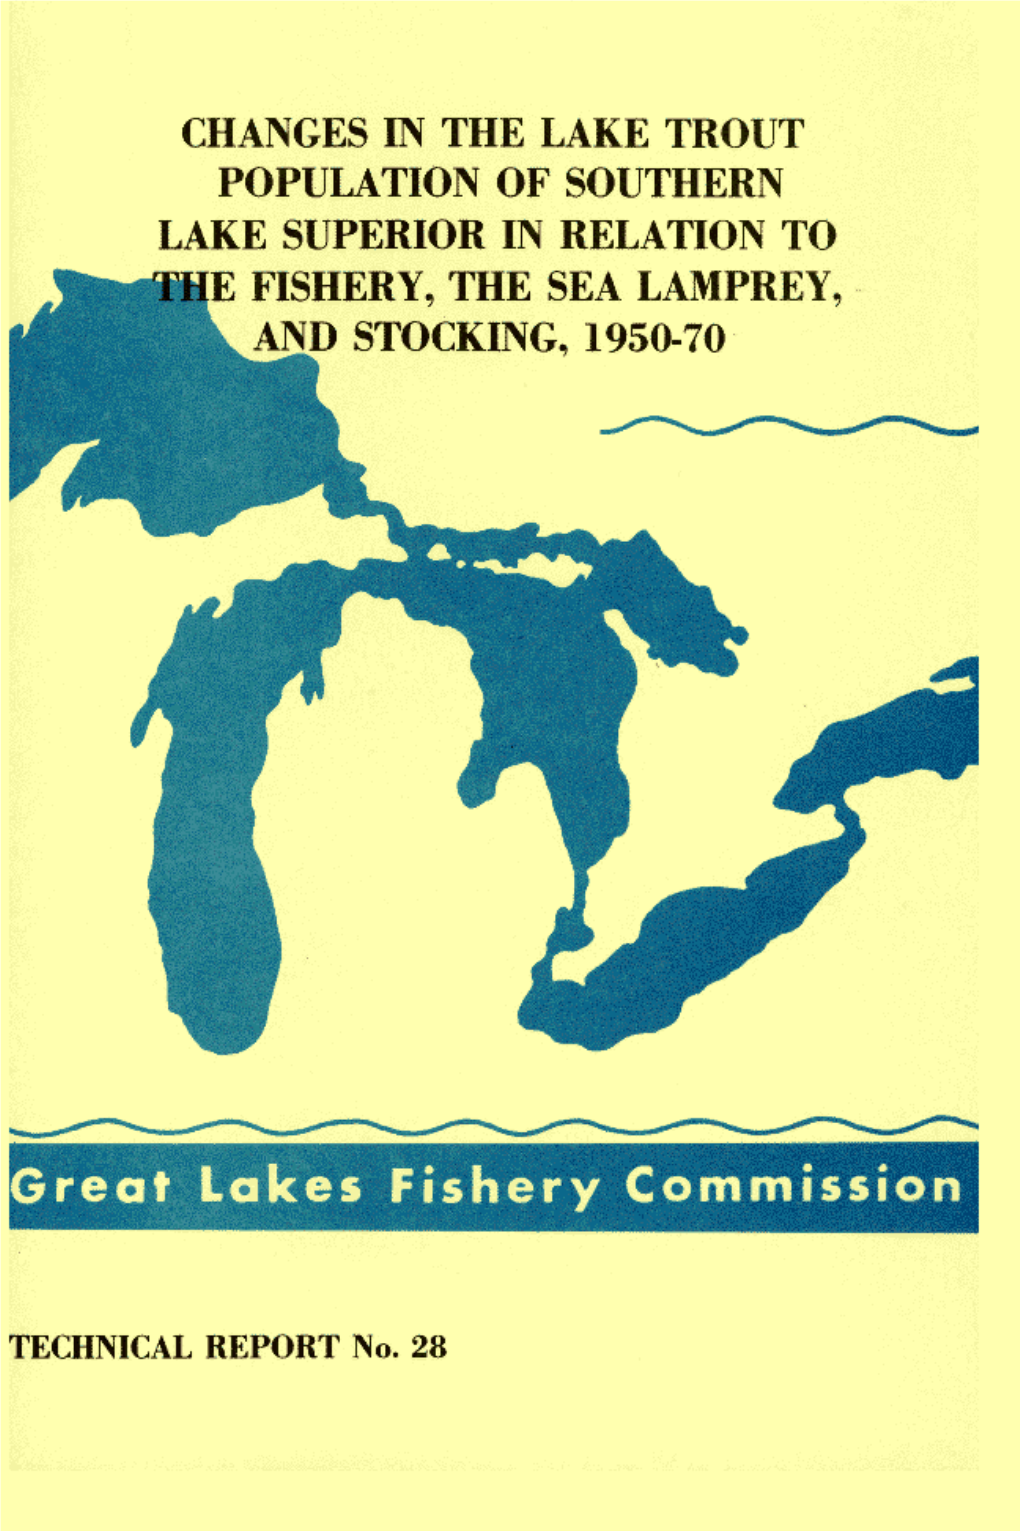 Changes in the Lake Trout Population of Southern Lake Superior in Relation to the Fishery, the Sea Lamprey, and Stocking, 1950-70